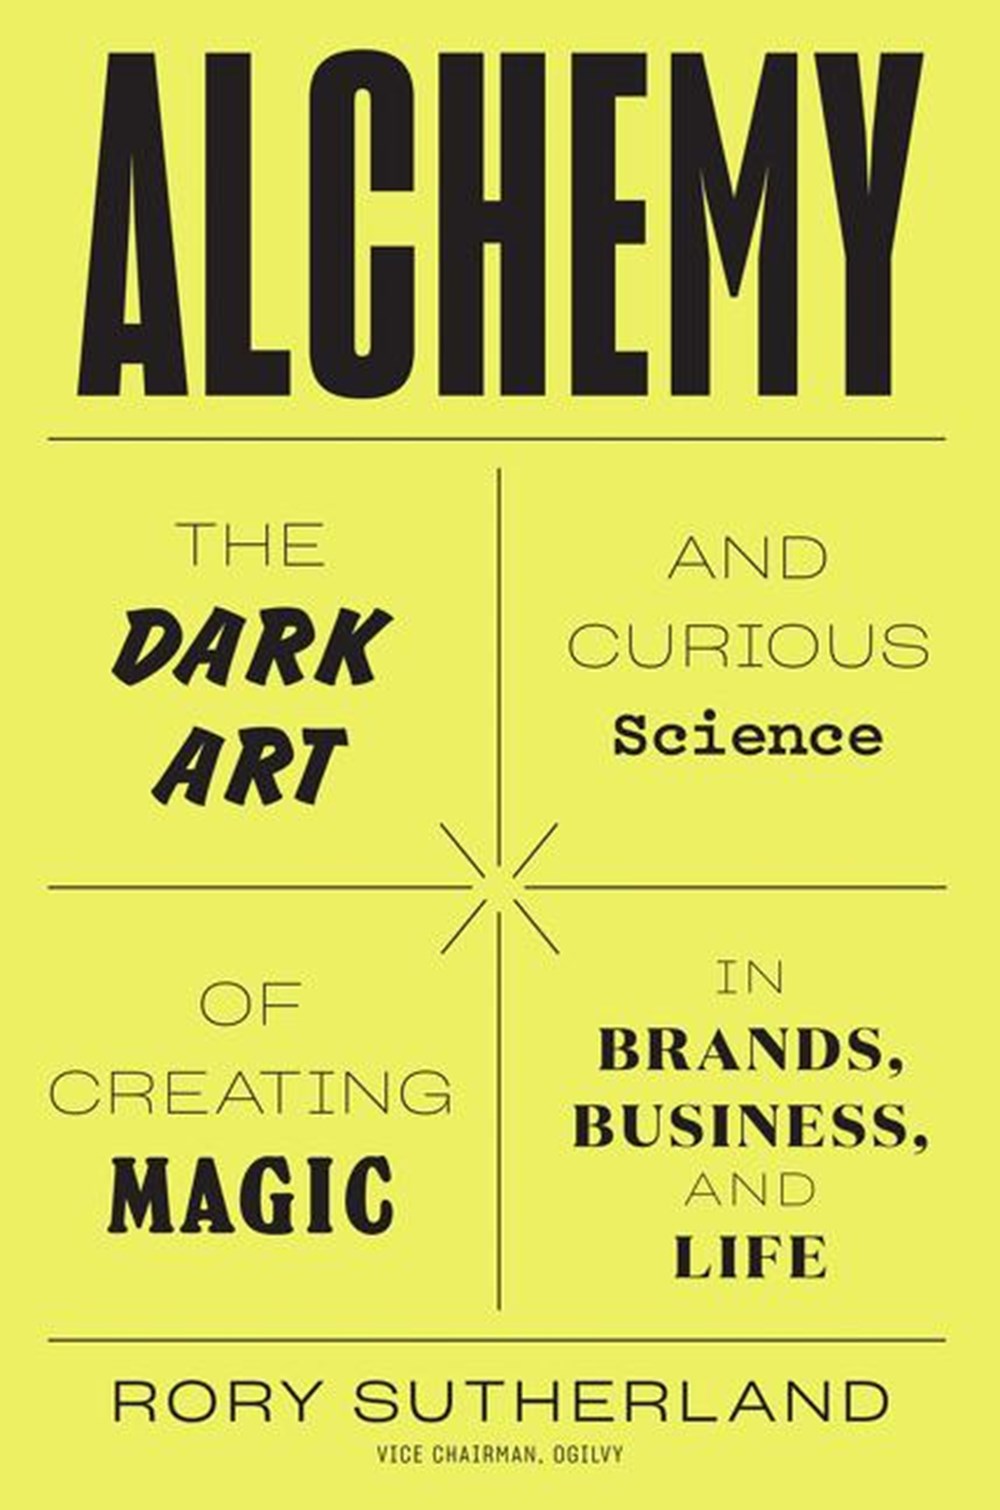 Alchemy The Dark Art and Curious Science of Creating Magic in Brands, Business, and Life